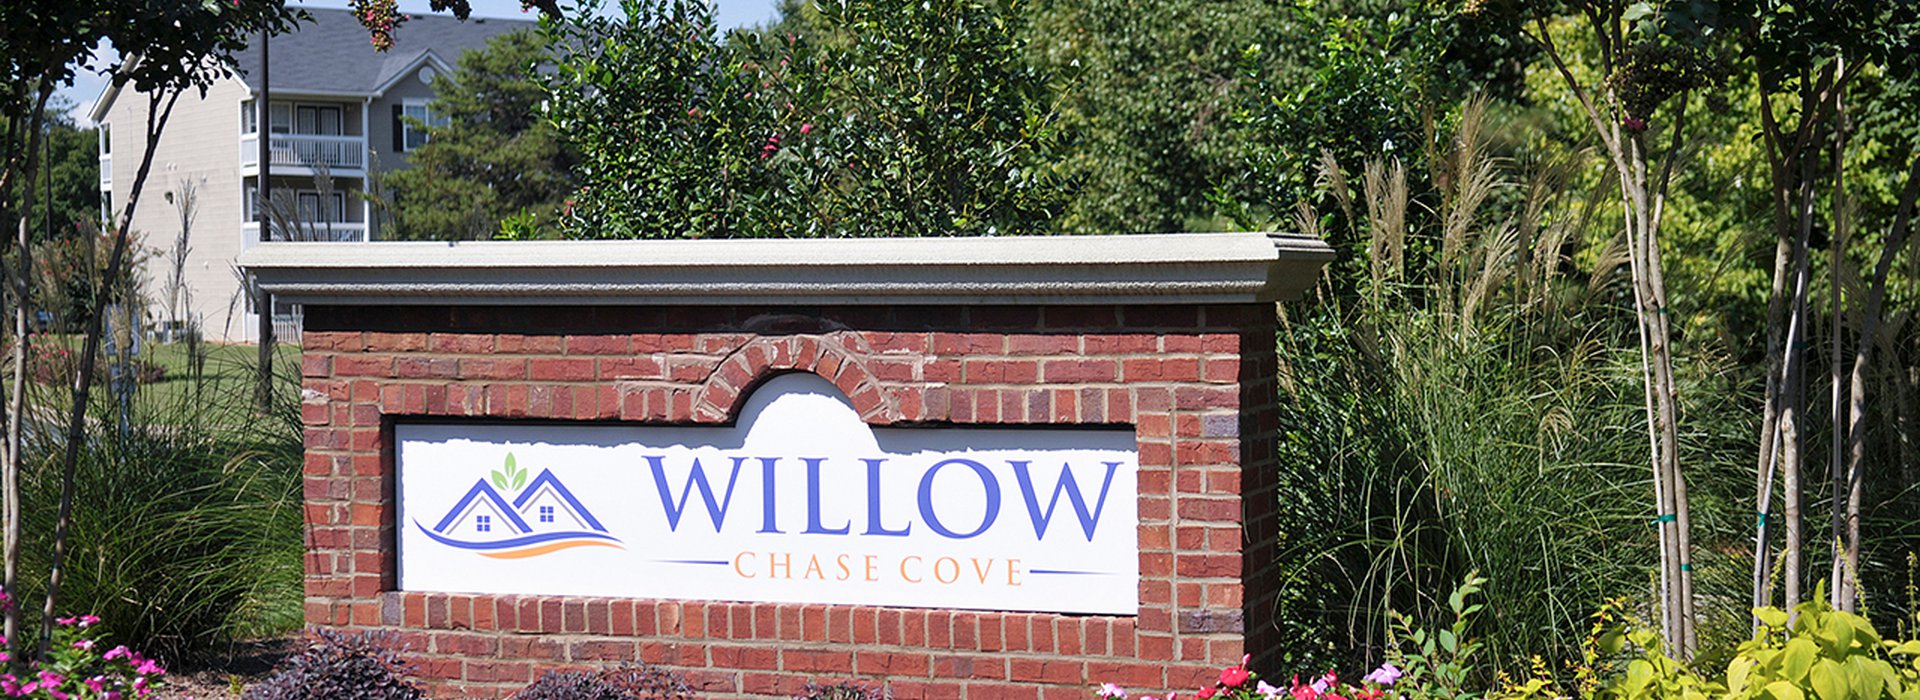 Willow Chase Cove sign